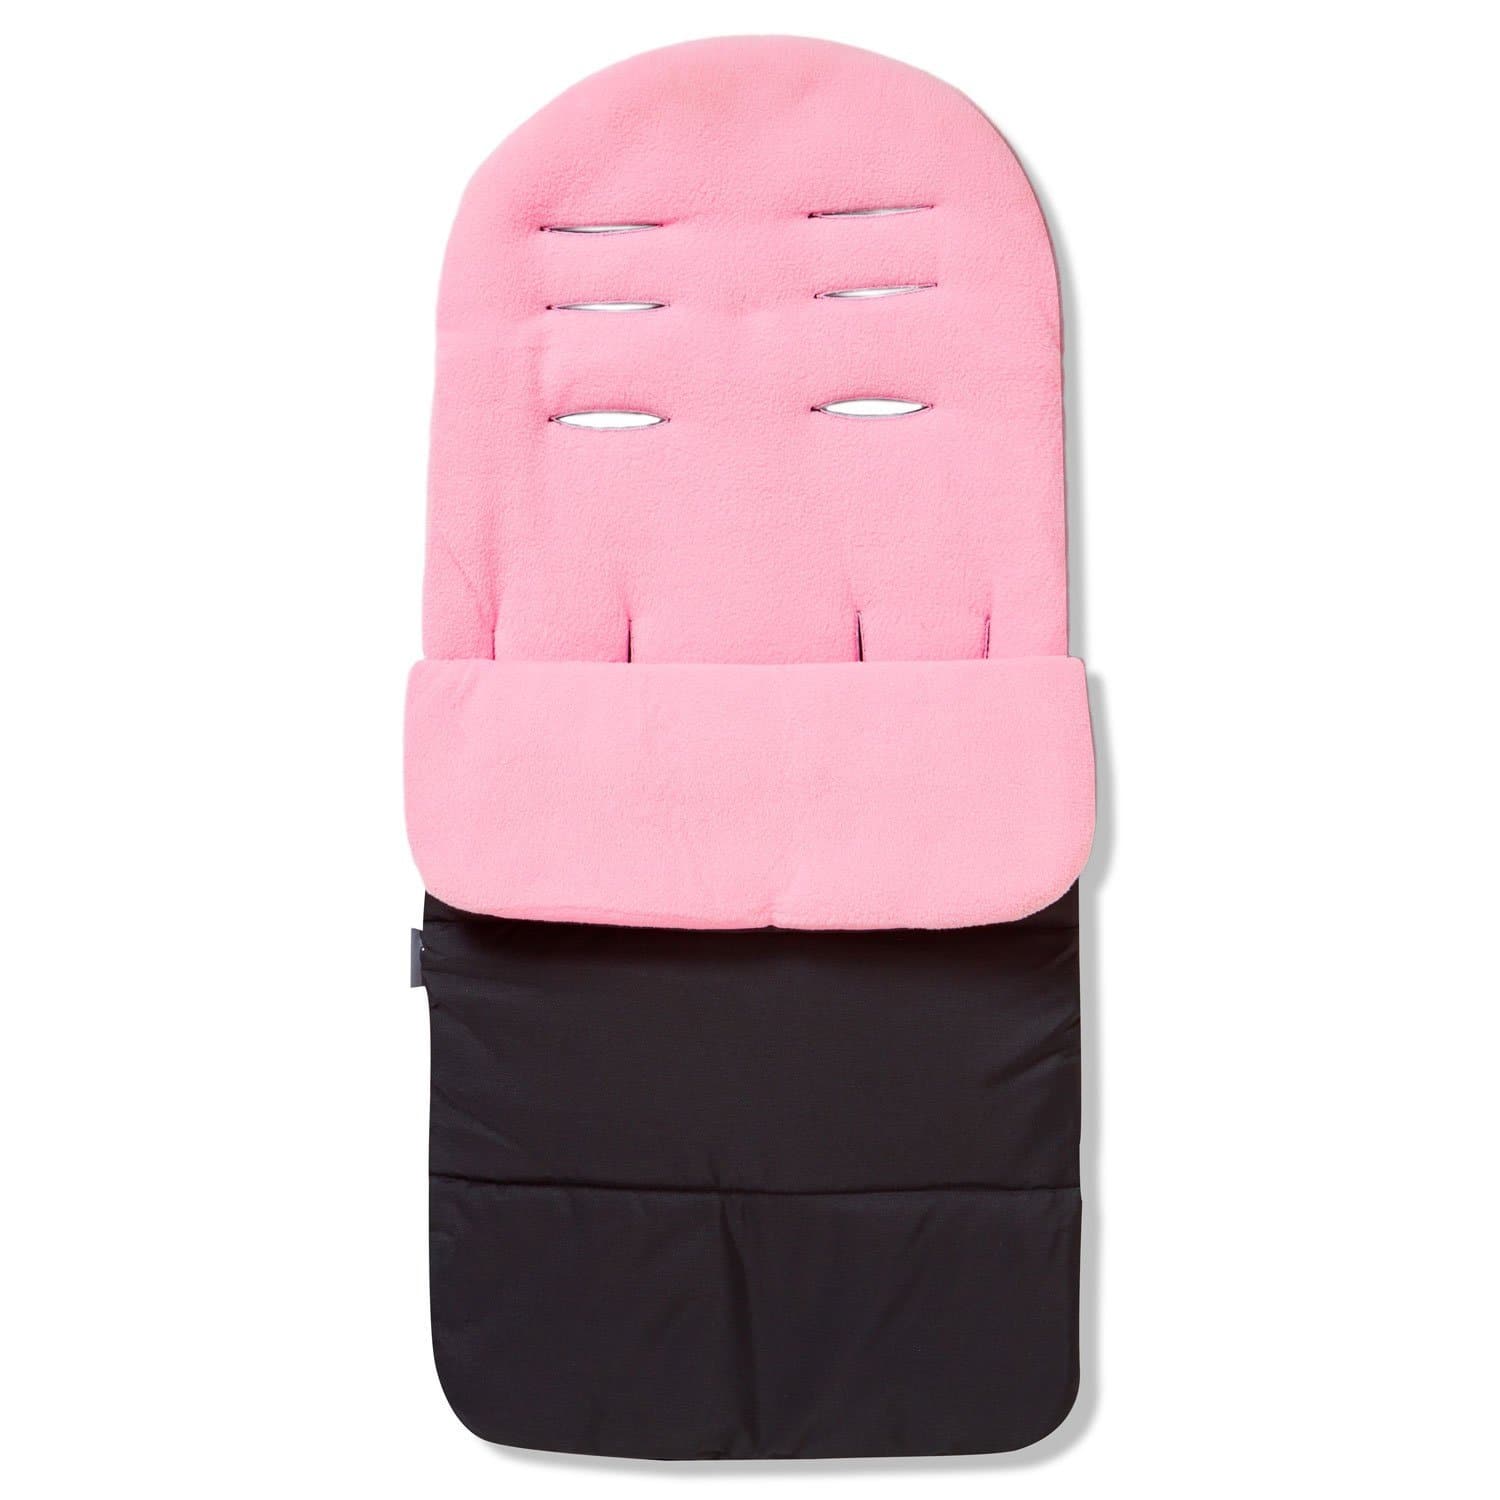 Premium Footmuff / Cosy Toes Compatible with Britax - Candy Pink / Fits All Models | For Your Little One